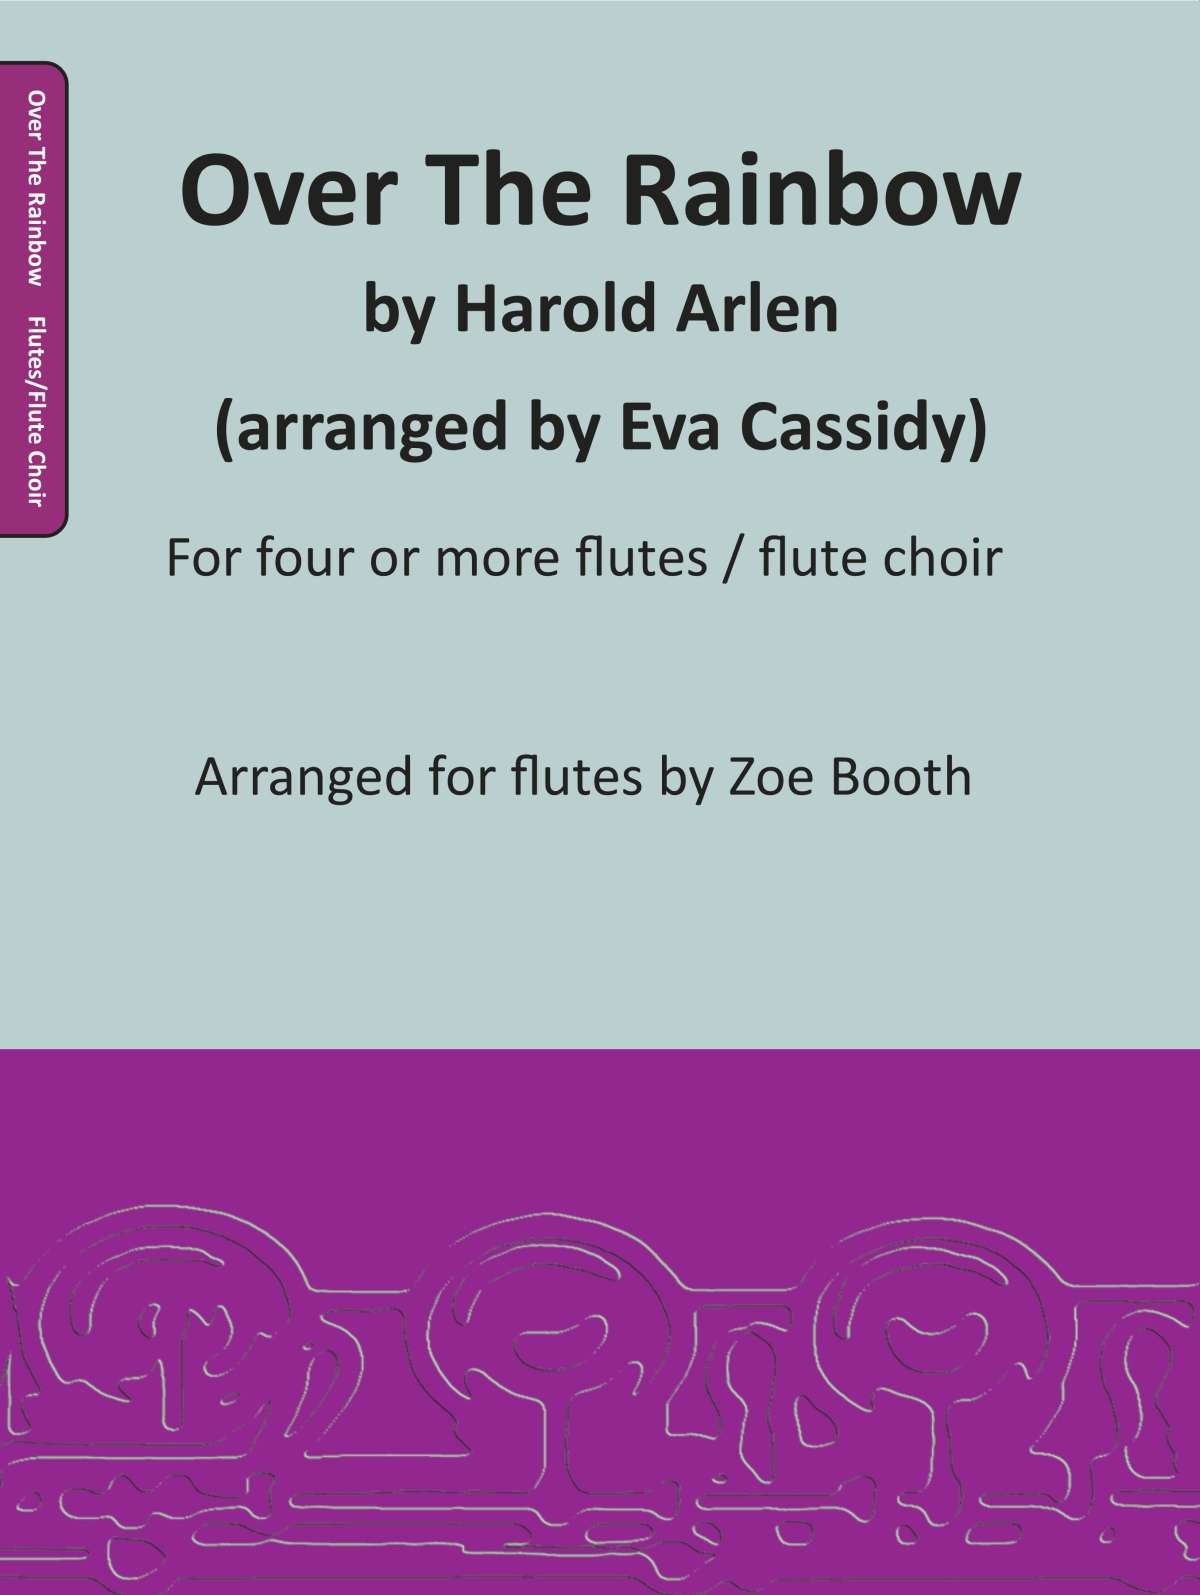 Over the Rainbow by Arlen, arranged by Zoë Booth for four or more flutes/flute choir